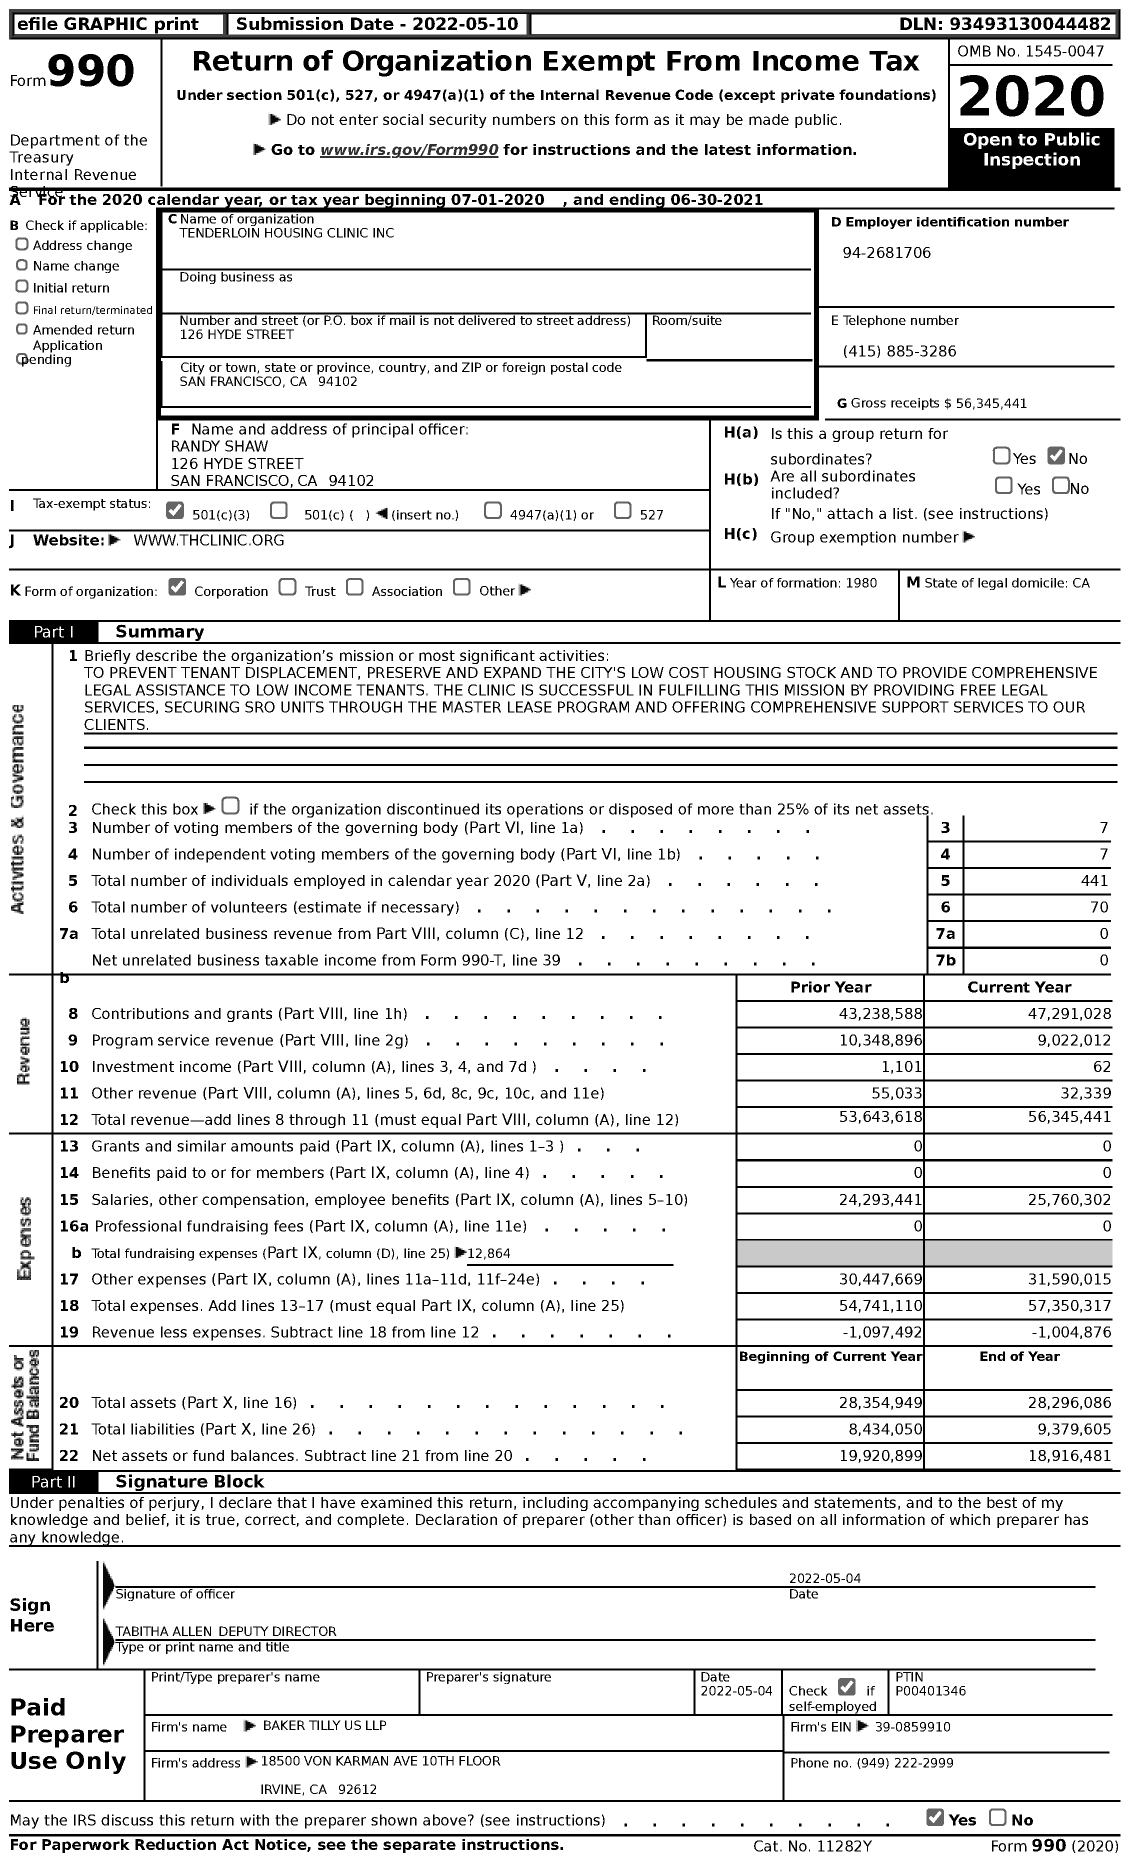 Image of first page of 2020 Form 990 for Tenderloin Housing Clinic (THC)